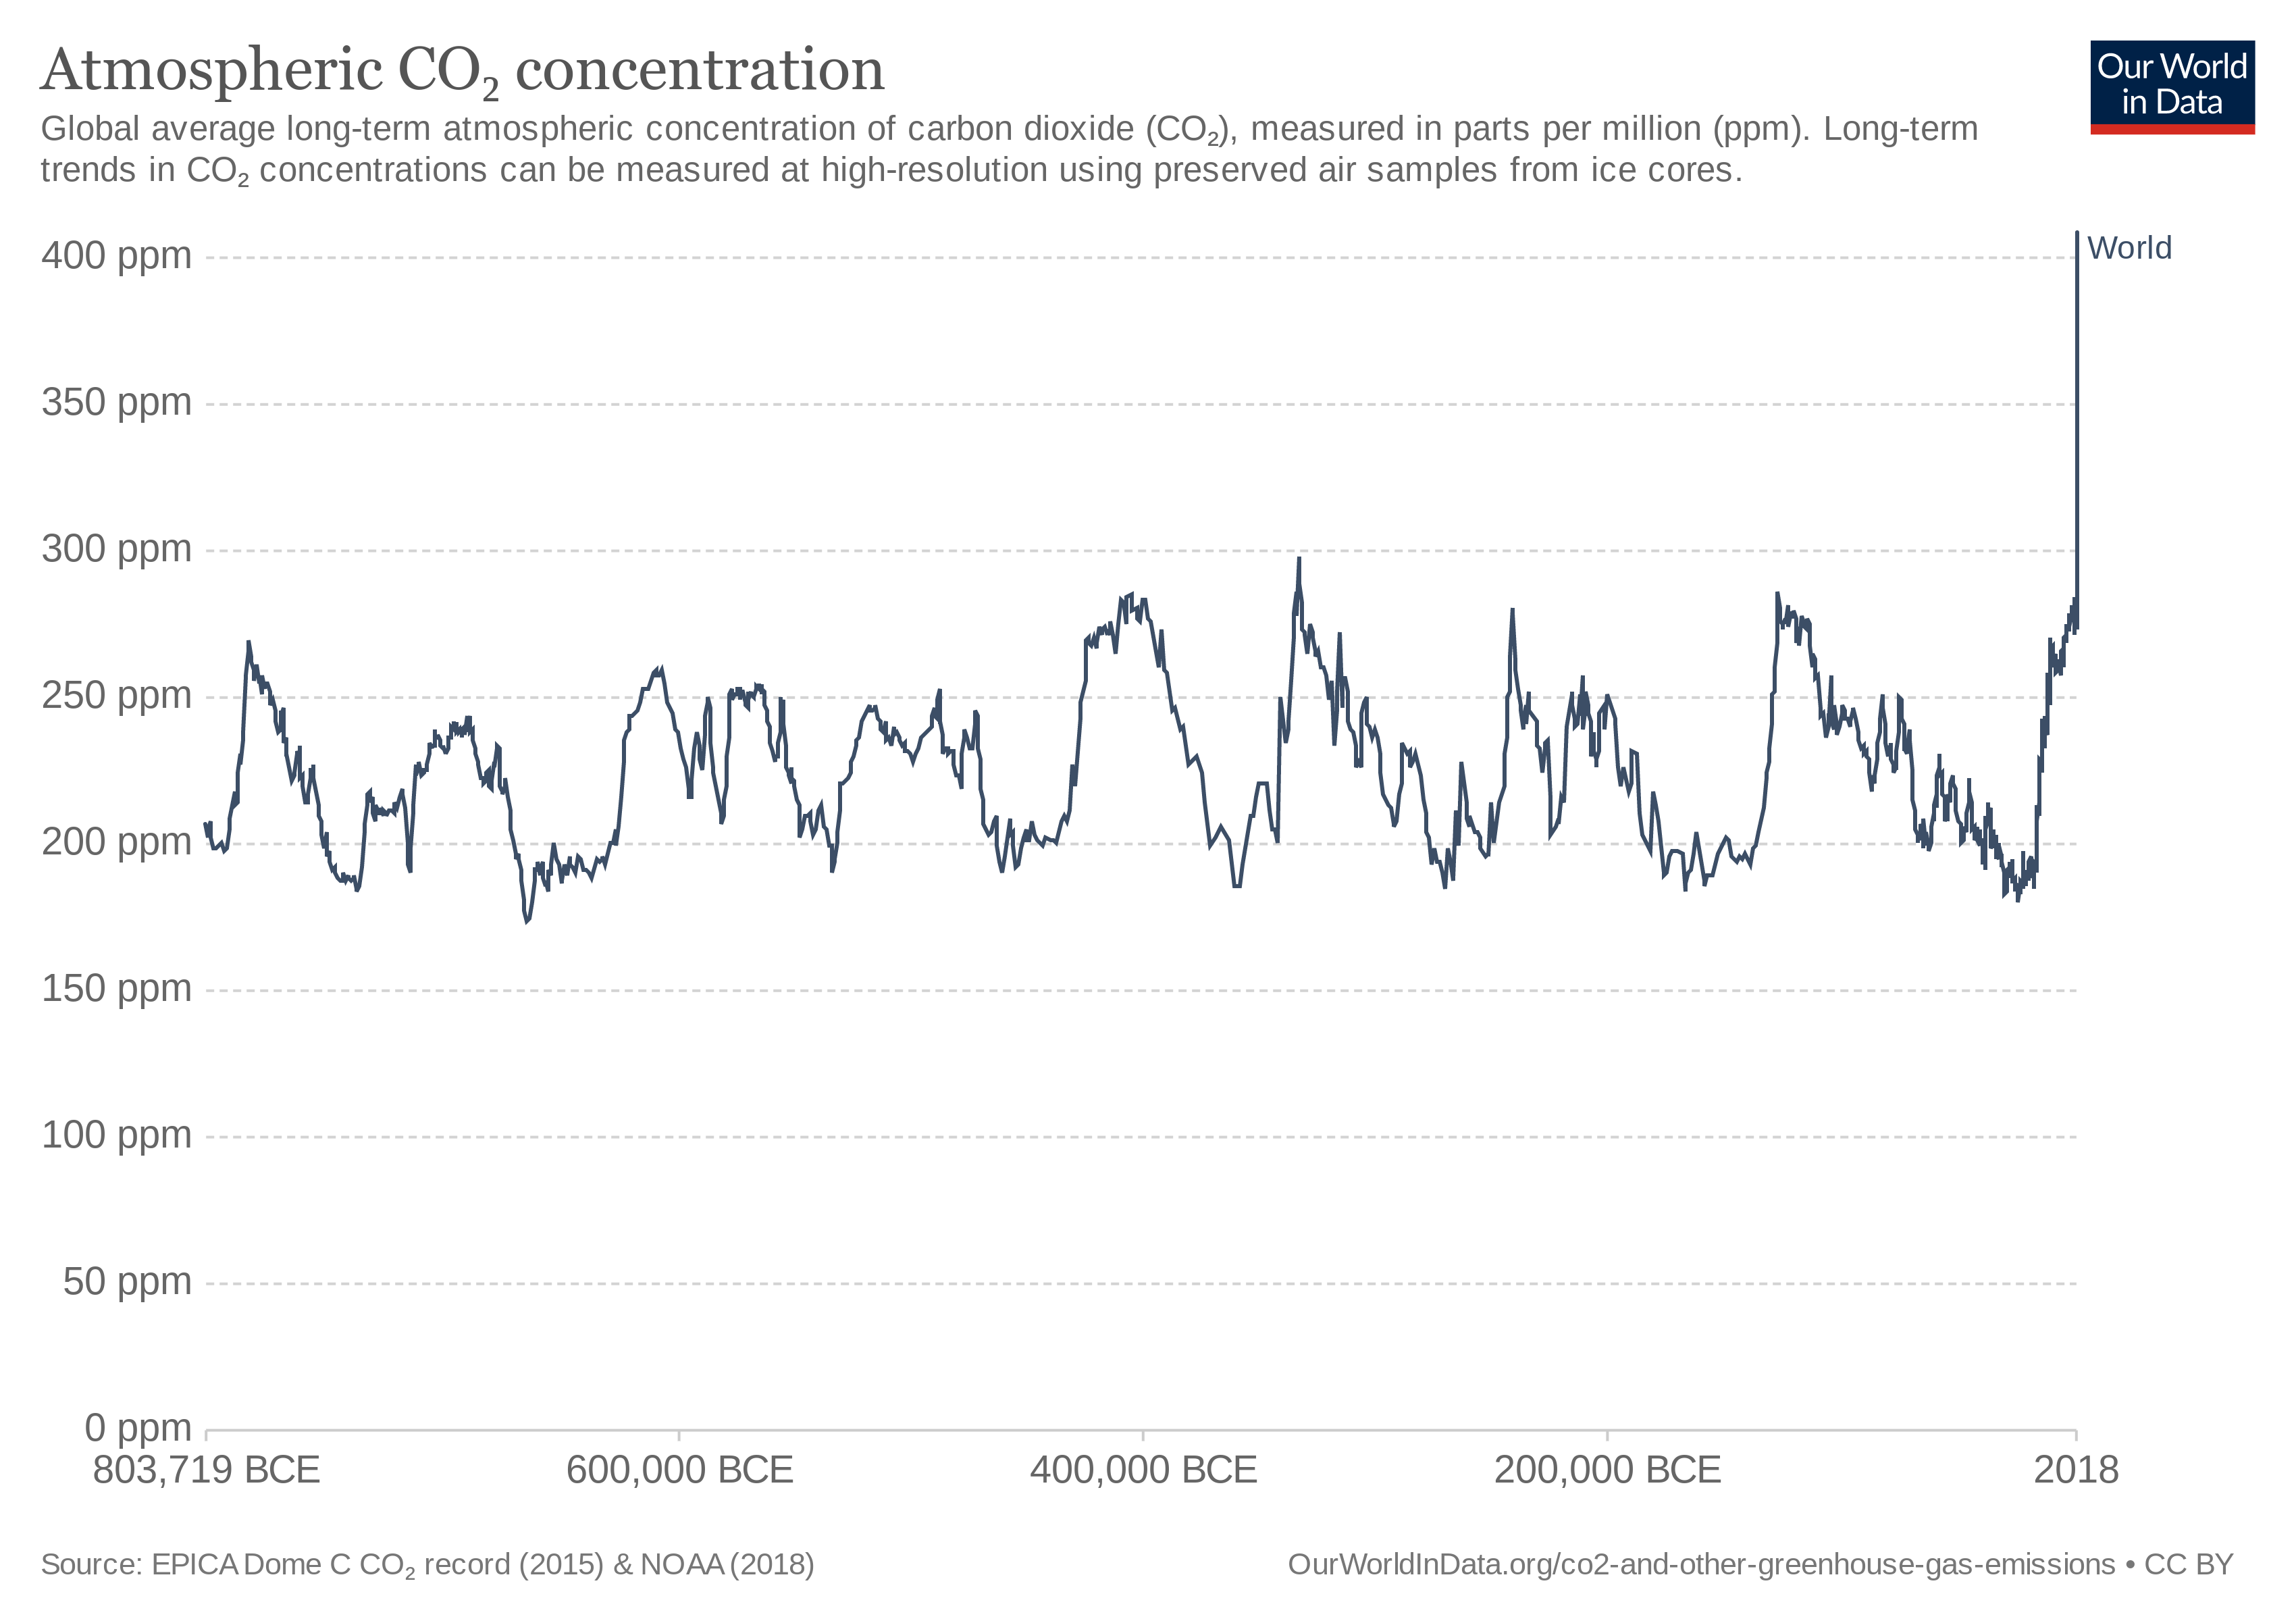 CO2 concentrations over the last 800,000 years